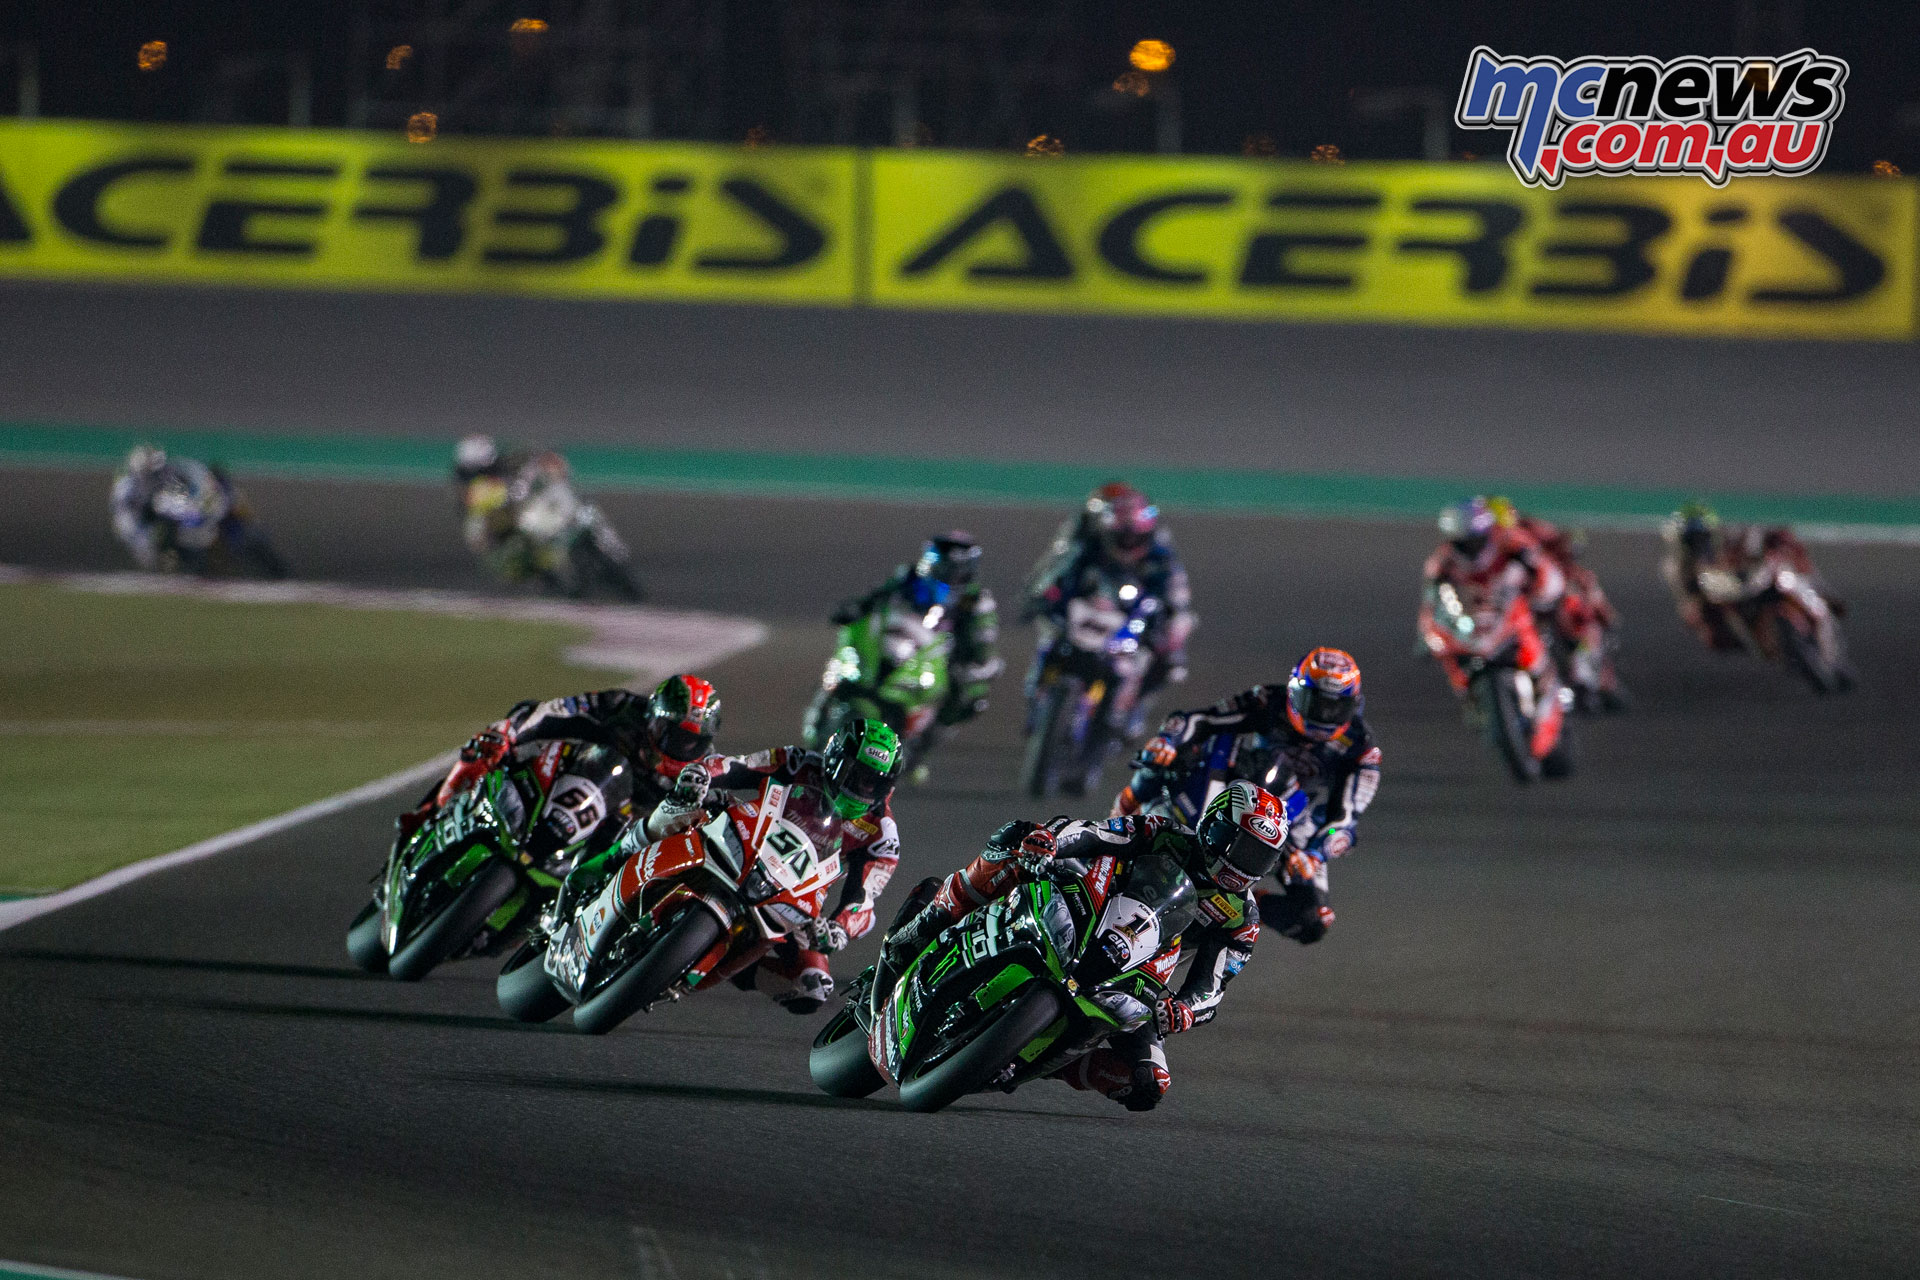 Not much rider movement for the riders at the pointy end of the field heading into WorldSBK season 2018